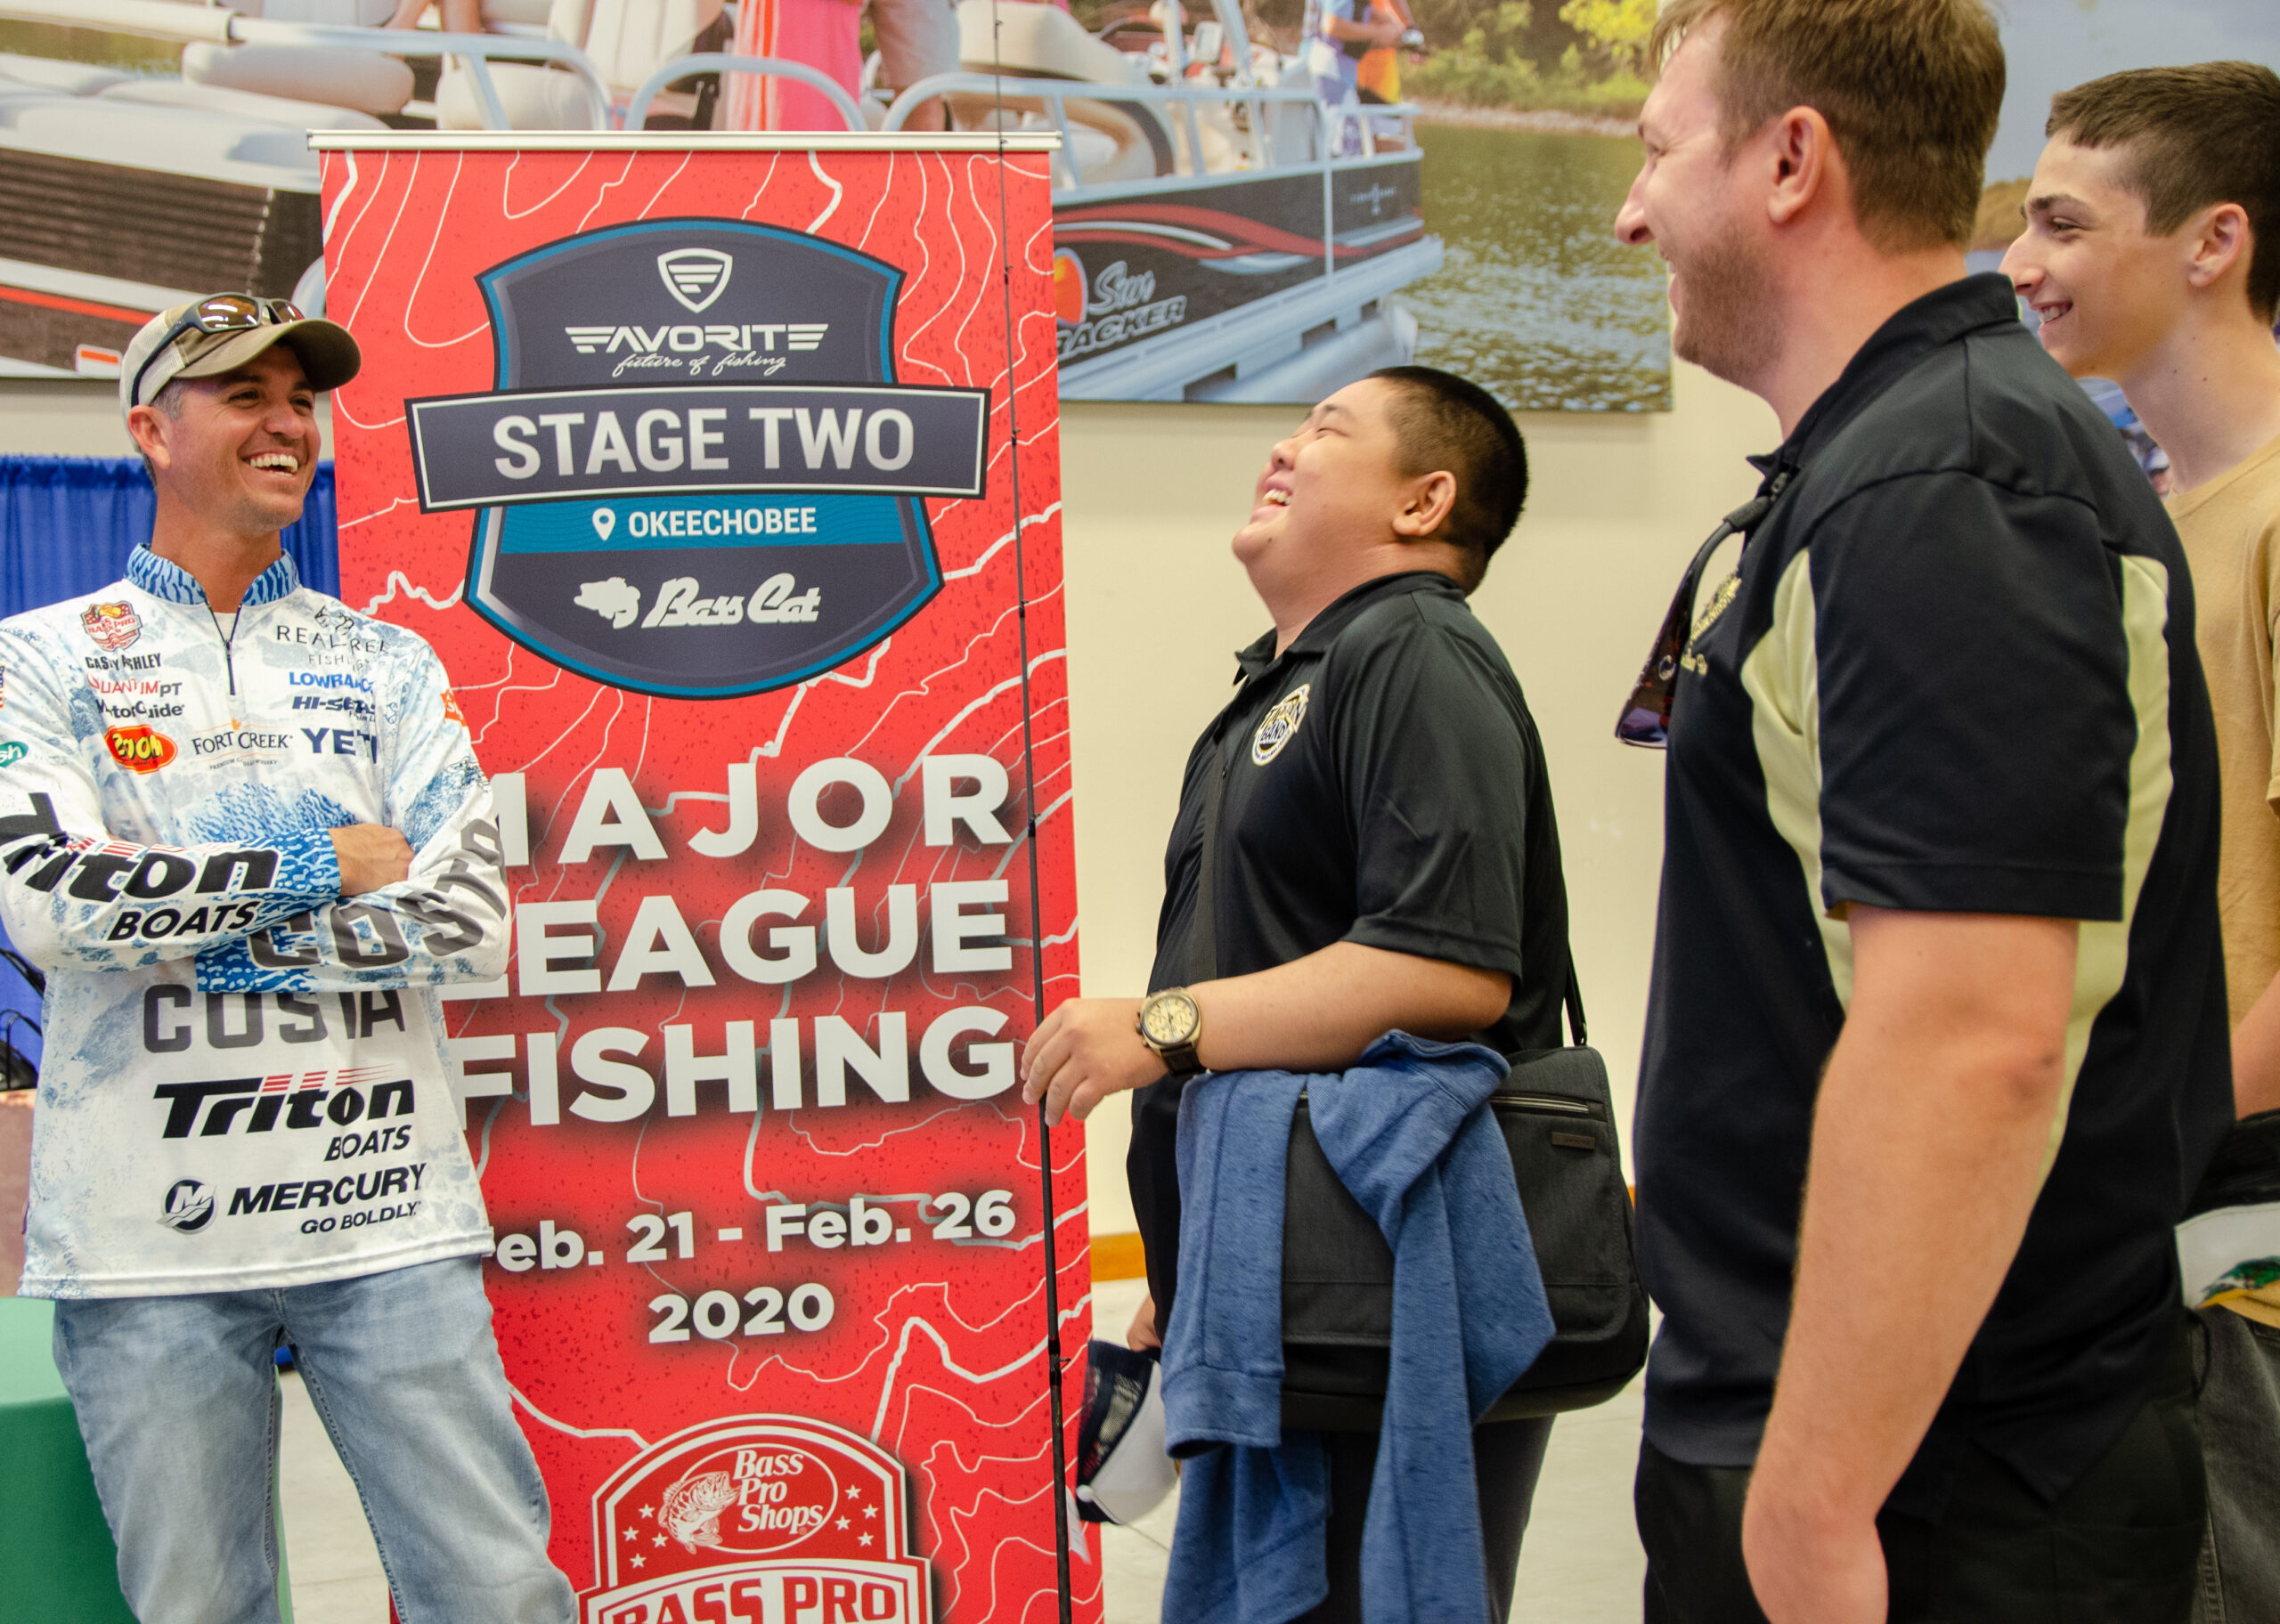 Abu Garcia Zata Casting Combo Claims ICAST 2023 Best In Category For Rod  And Reel Combo - Collegiate Bass Championship